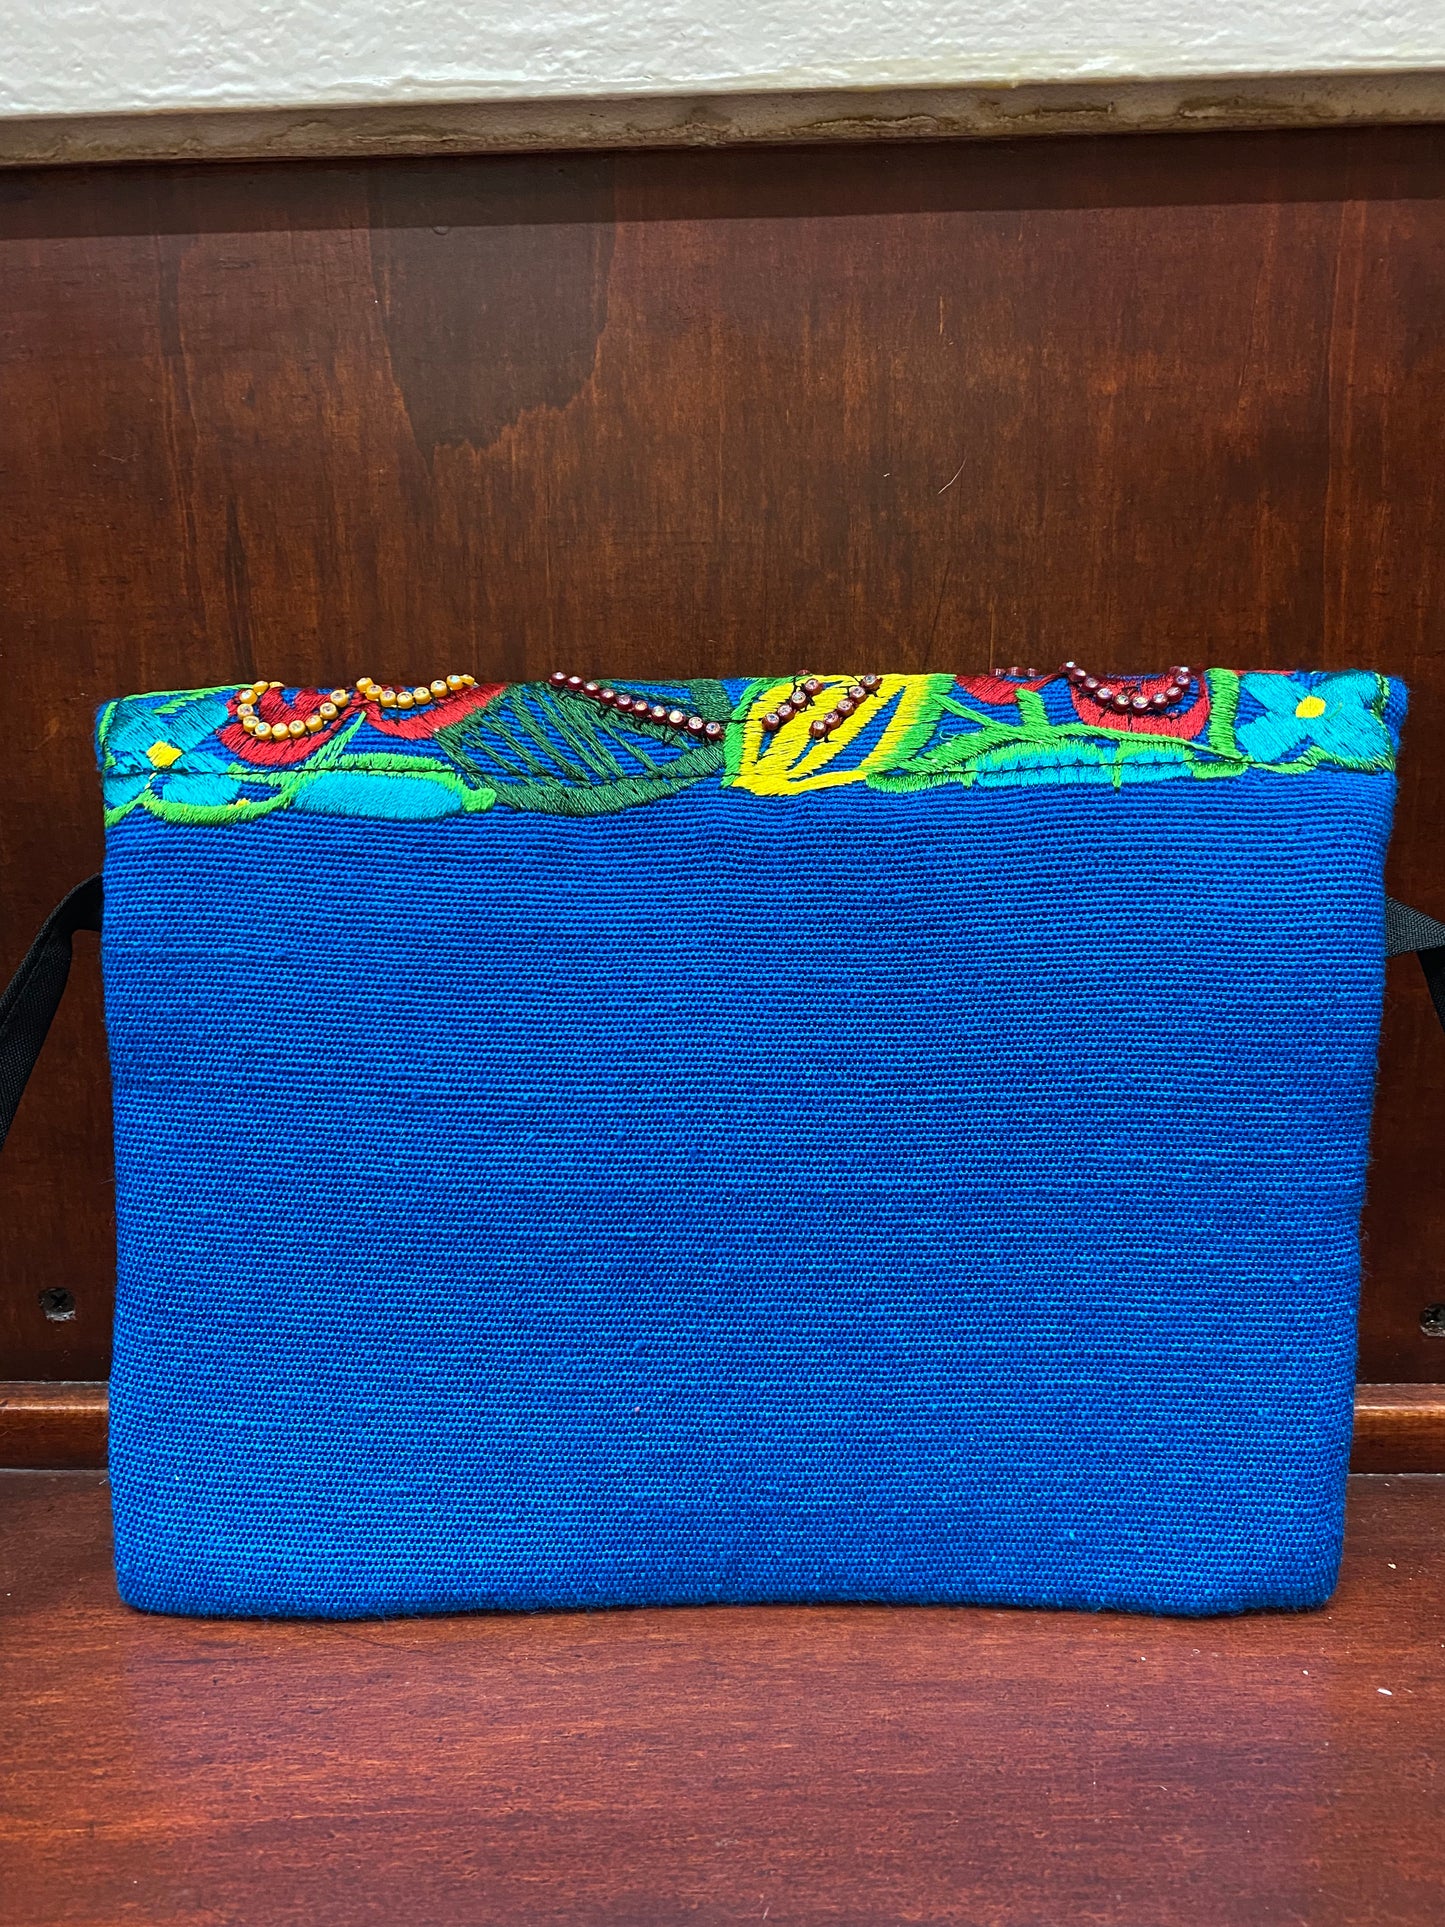 Embroidered Turquoise Messenger Bag